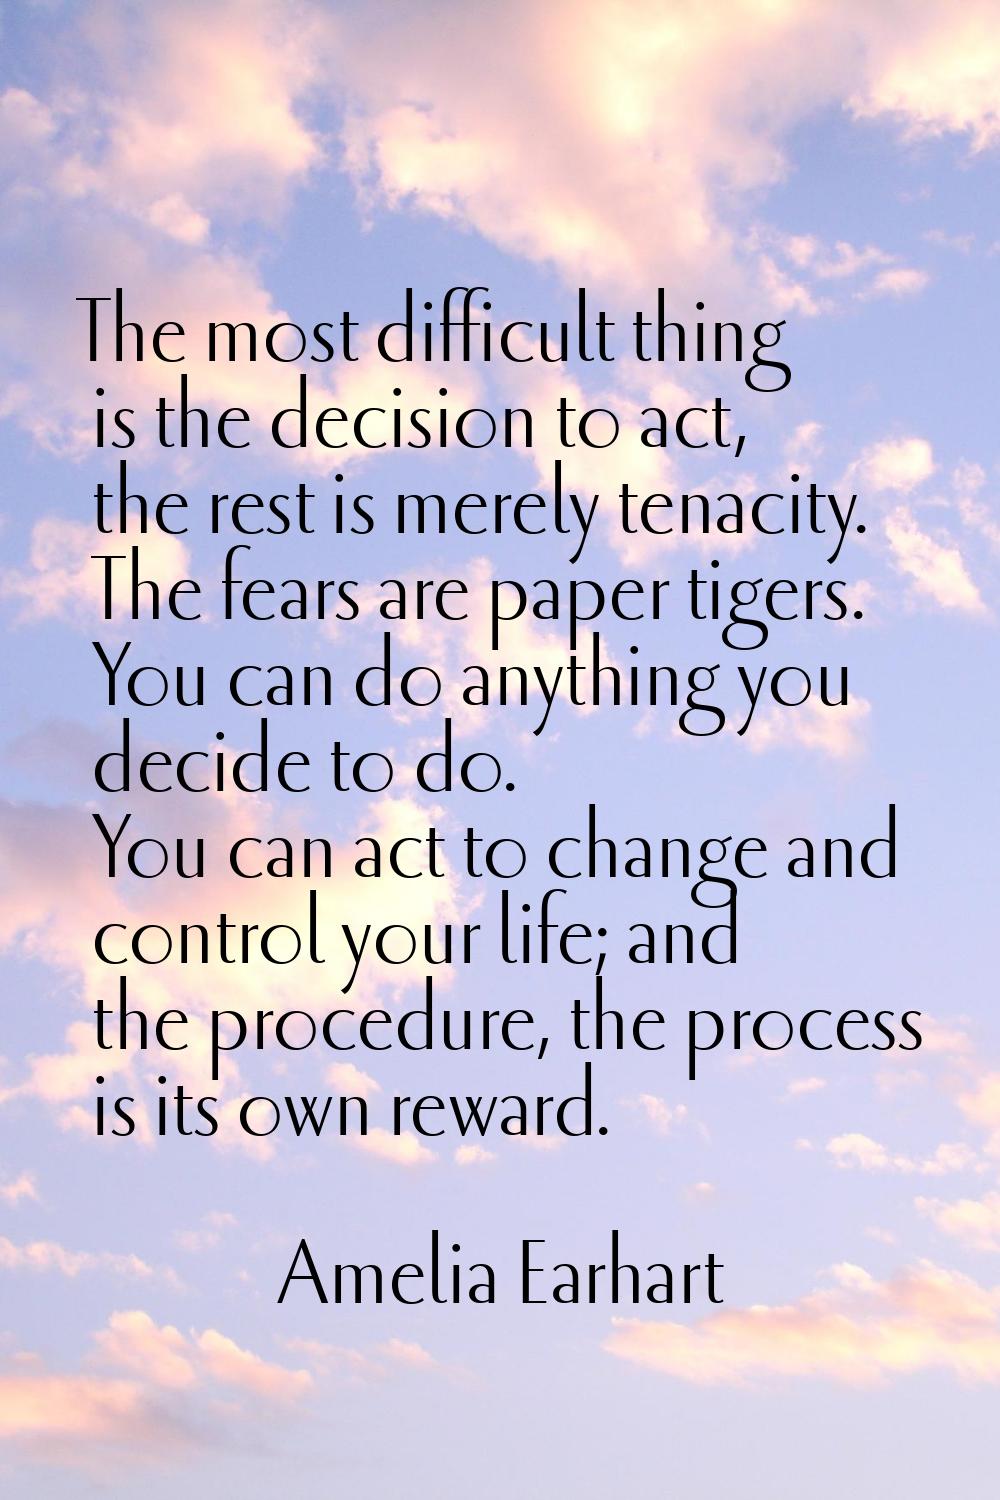 The most difficult thing is the decision to act, the rest is merely tenacity. The fears are paper t